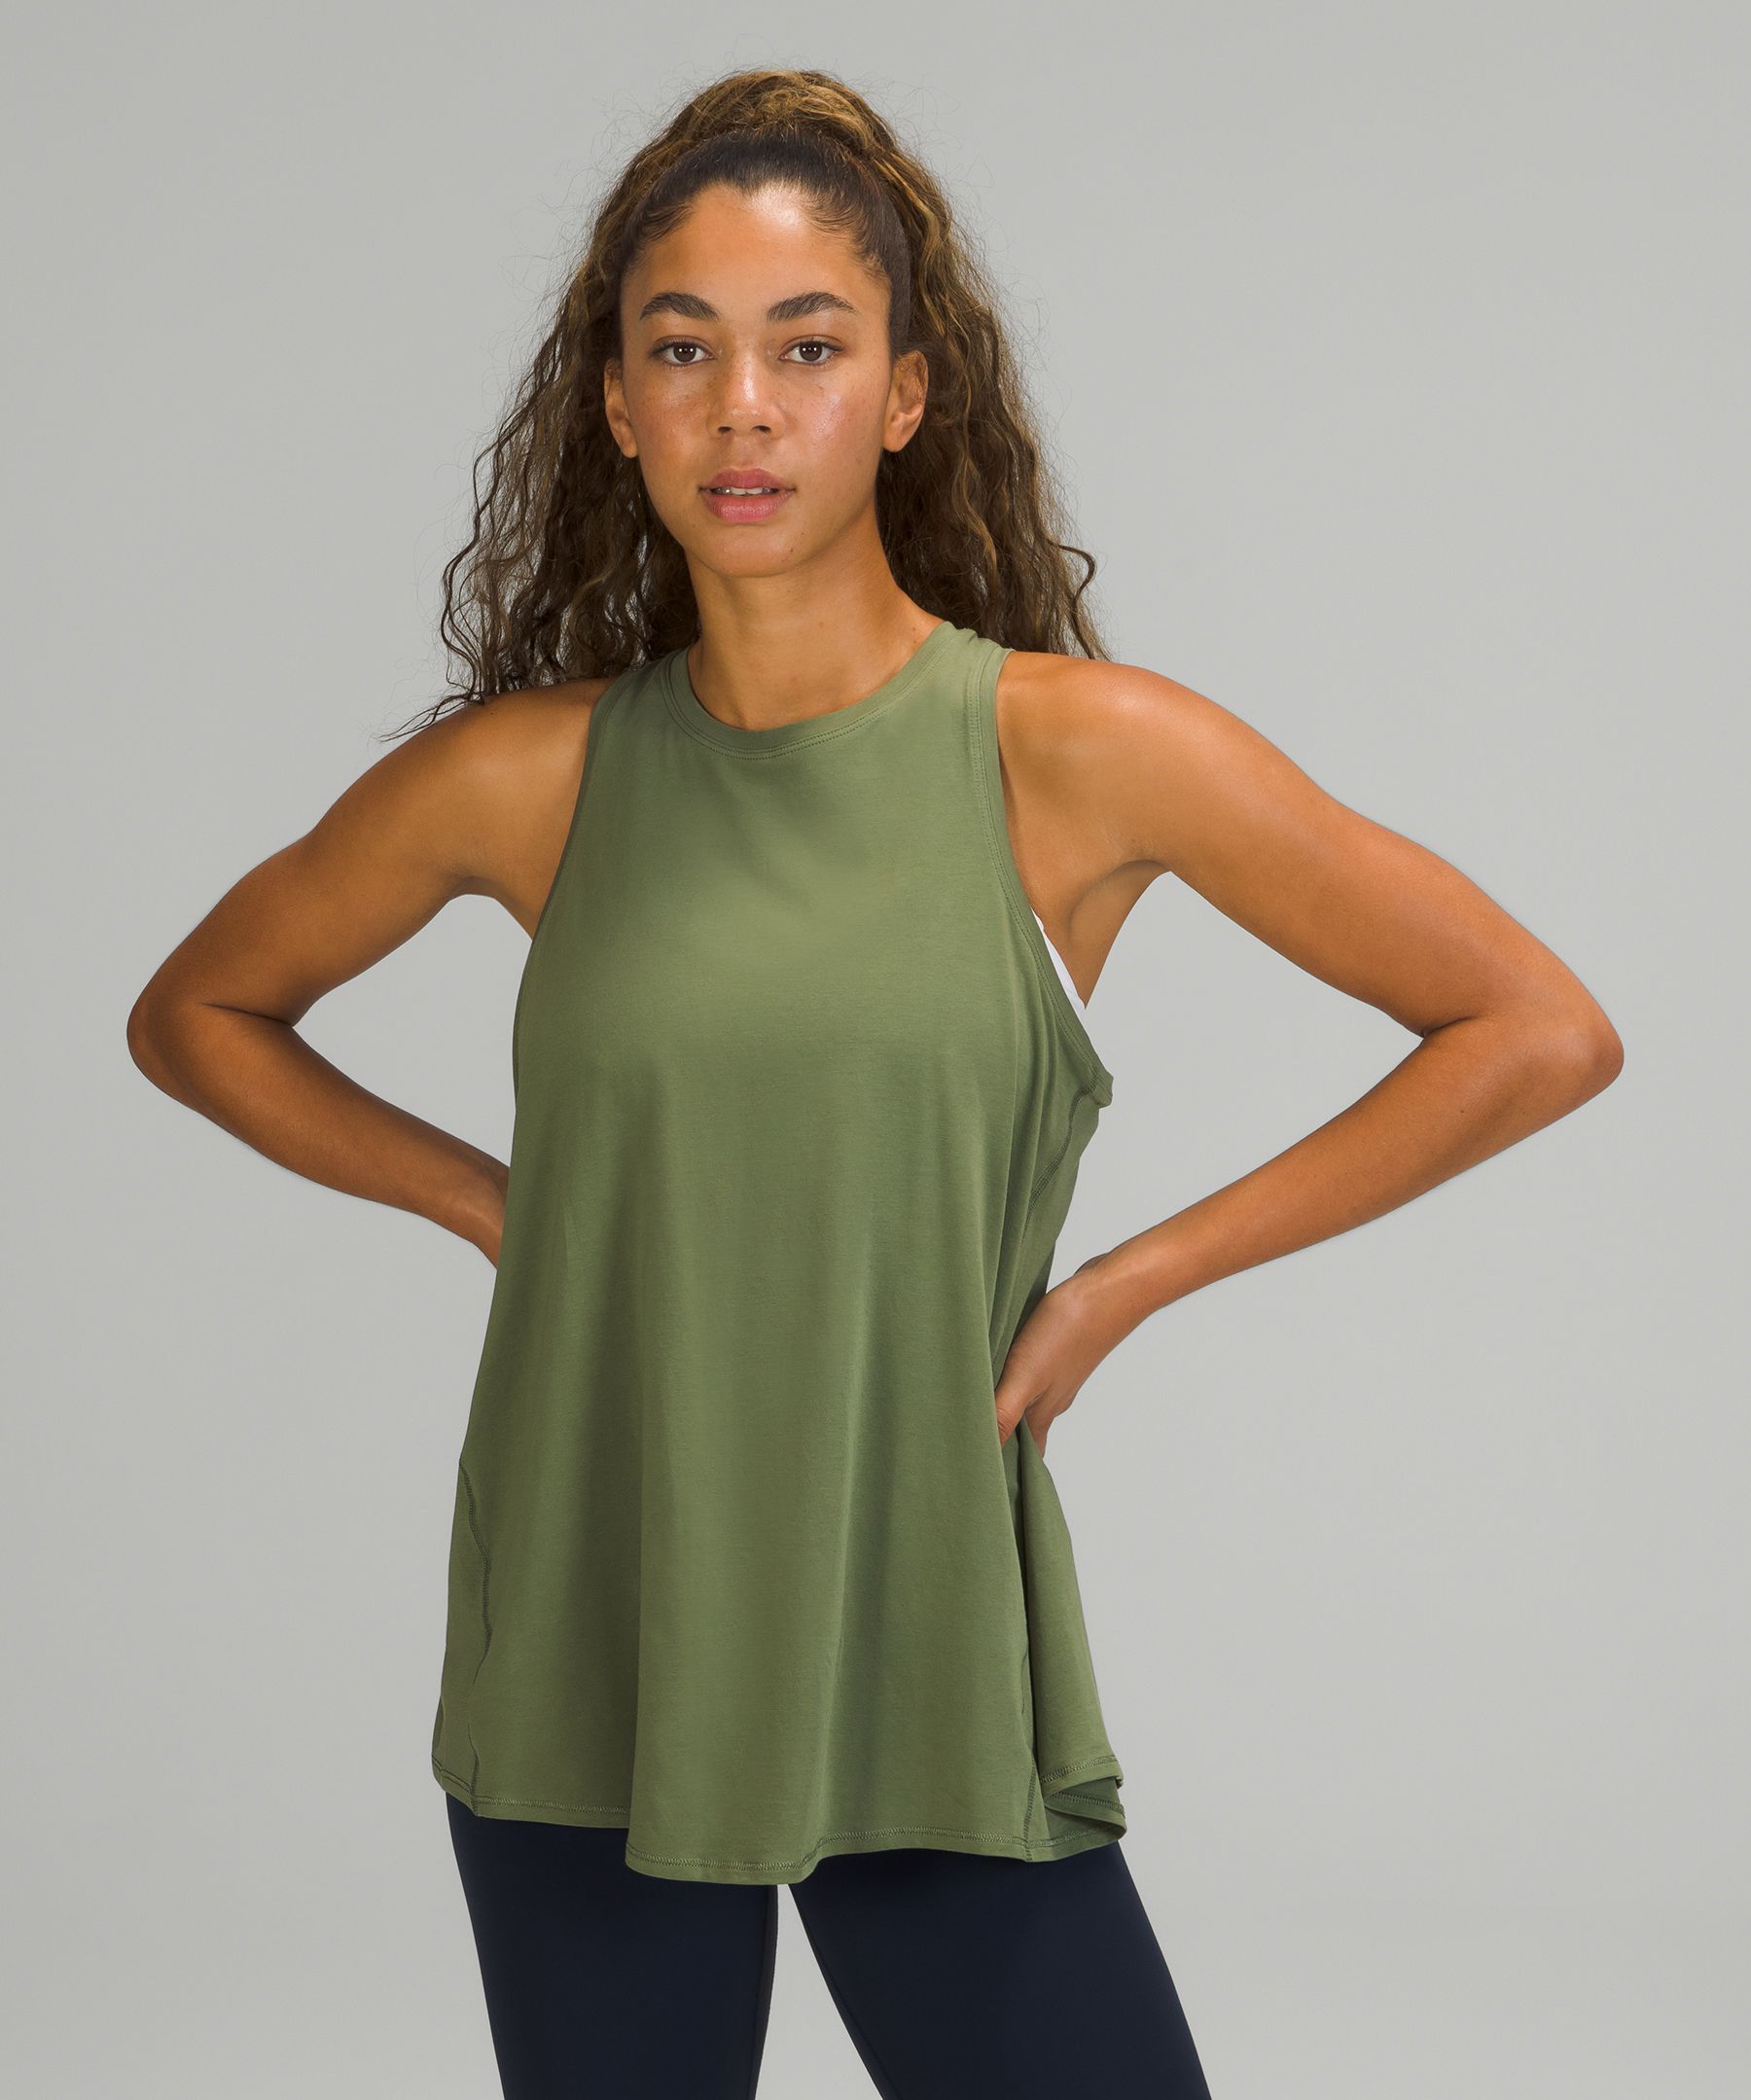 Lululemon All Tied Up Tank Top In Green Twill